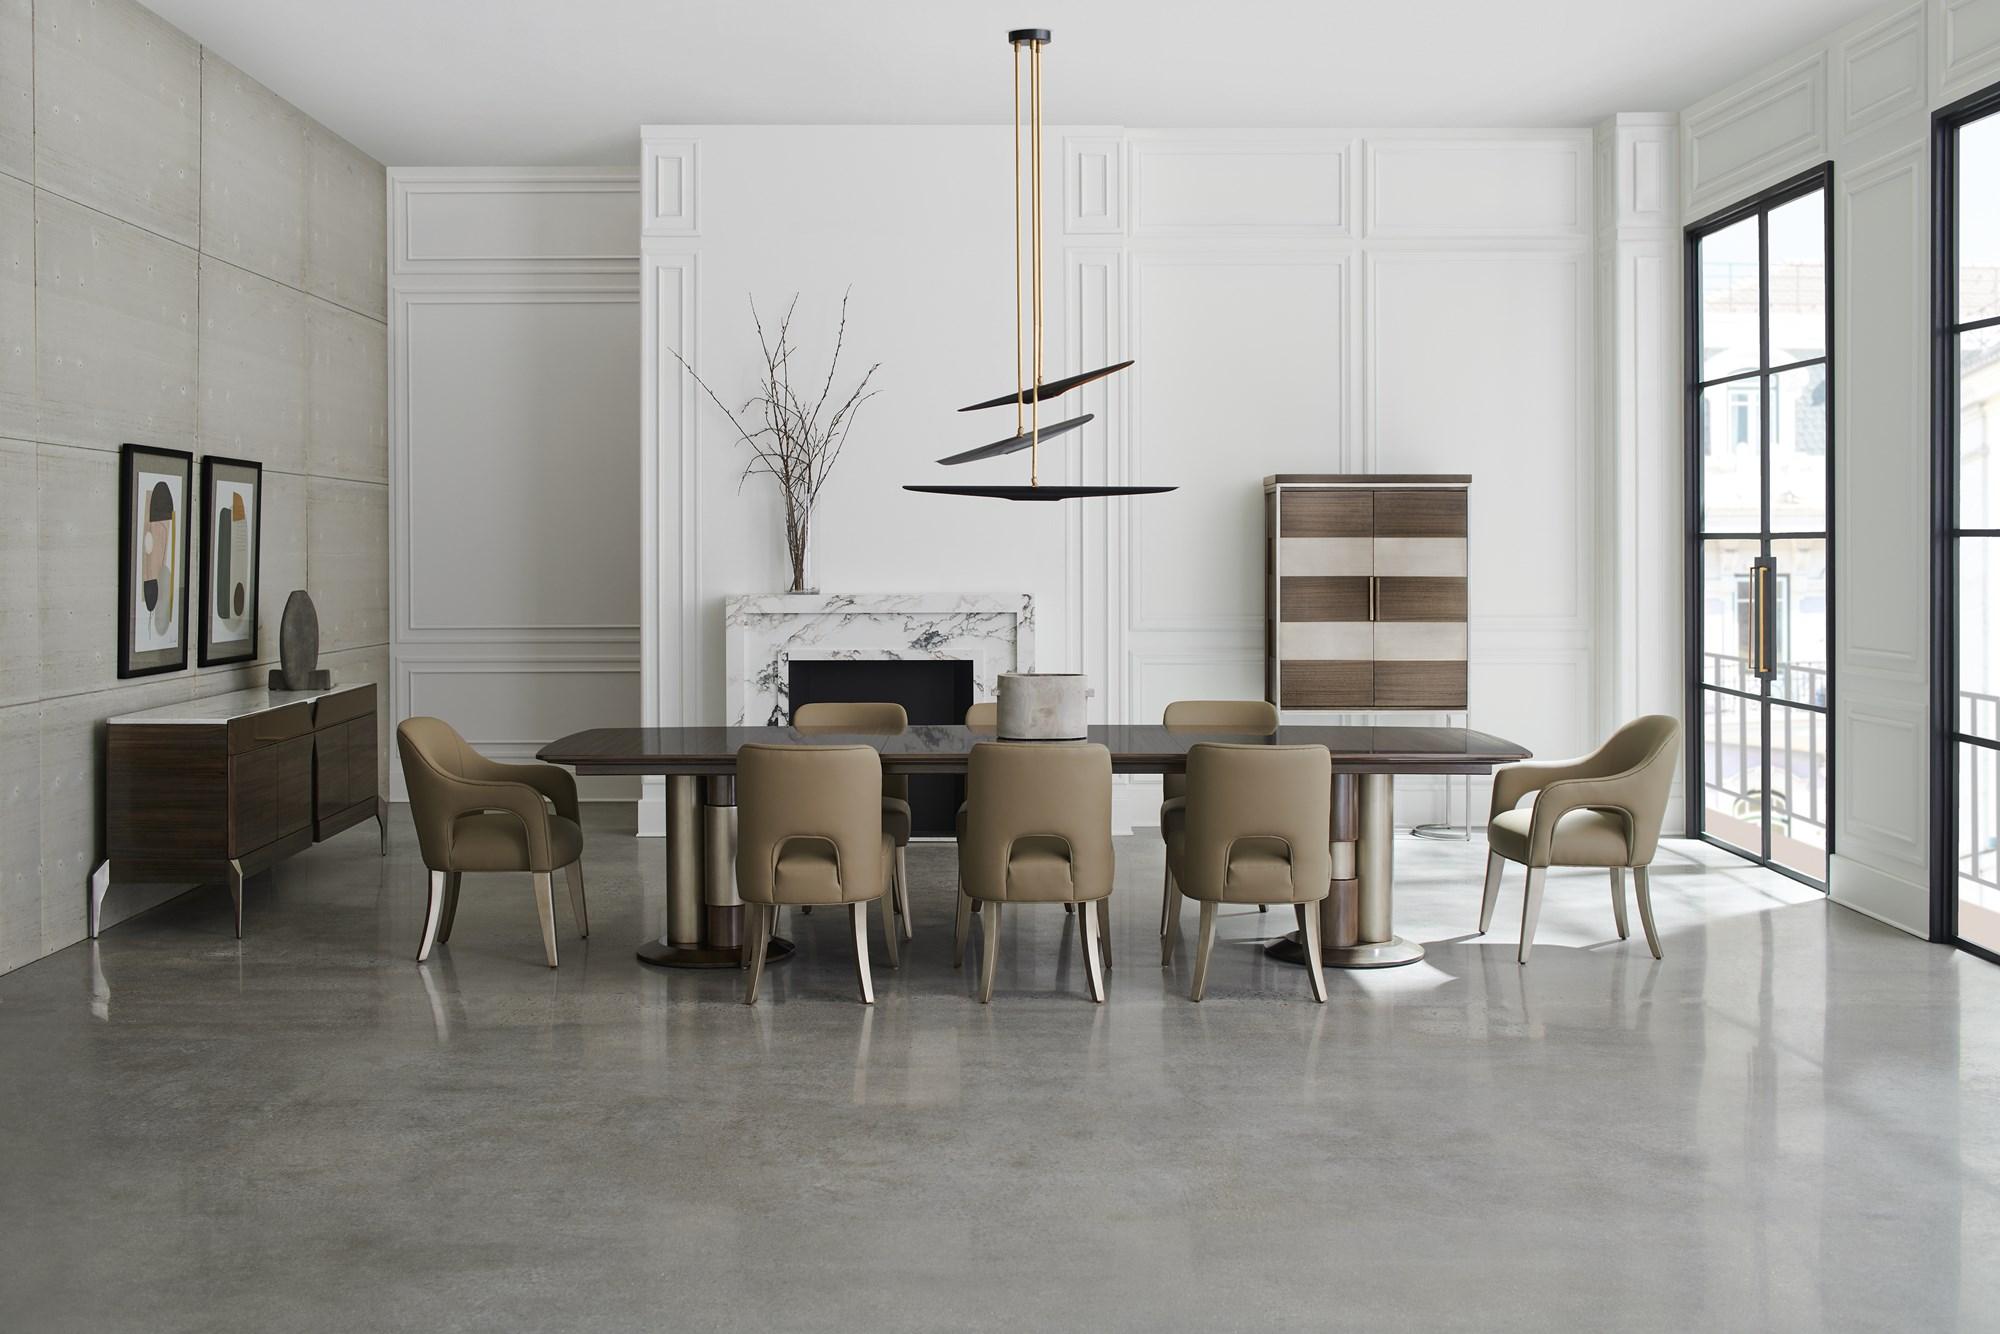 Modern Dining Table Set LA MODA DINING TABLE M132-421-201-Set-10 in Sepia Eco Leather